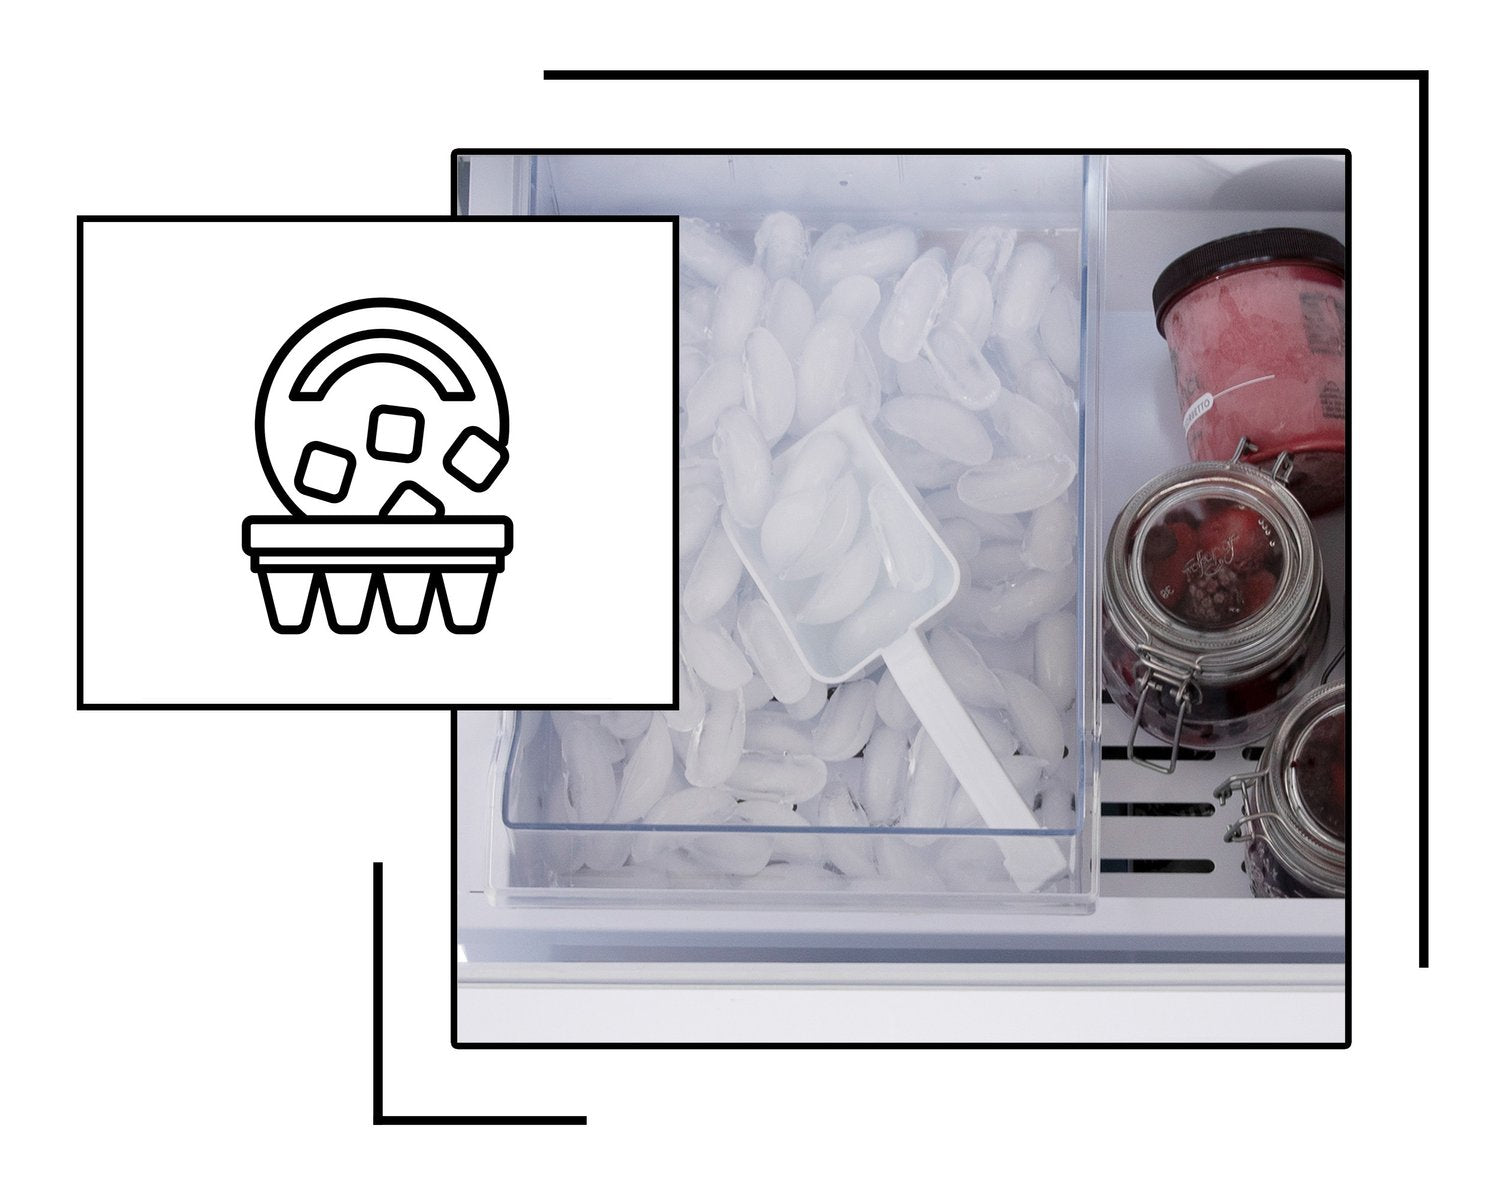 Icon and image representing built-in refrigerator with internal ice maker